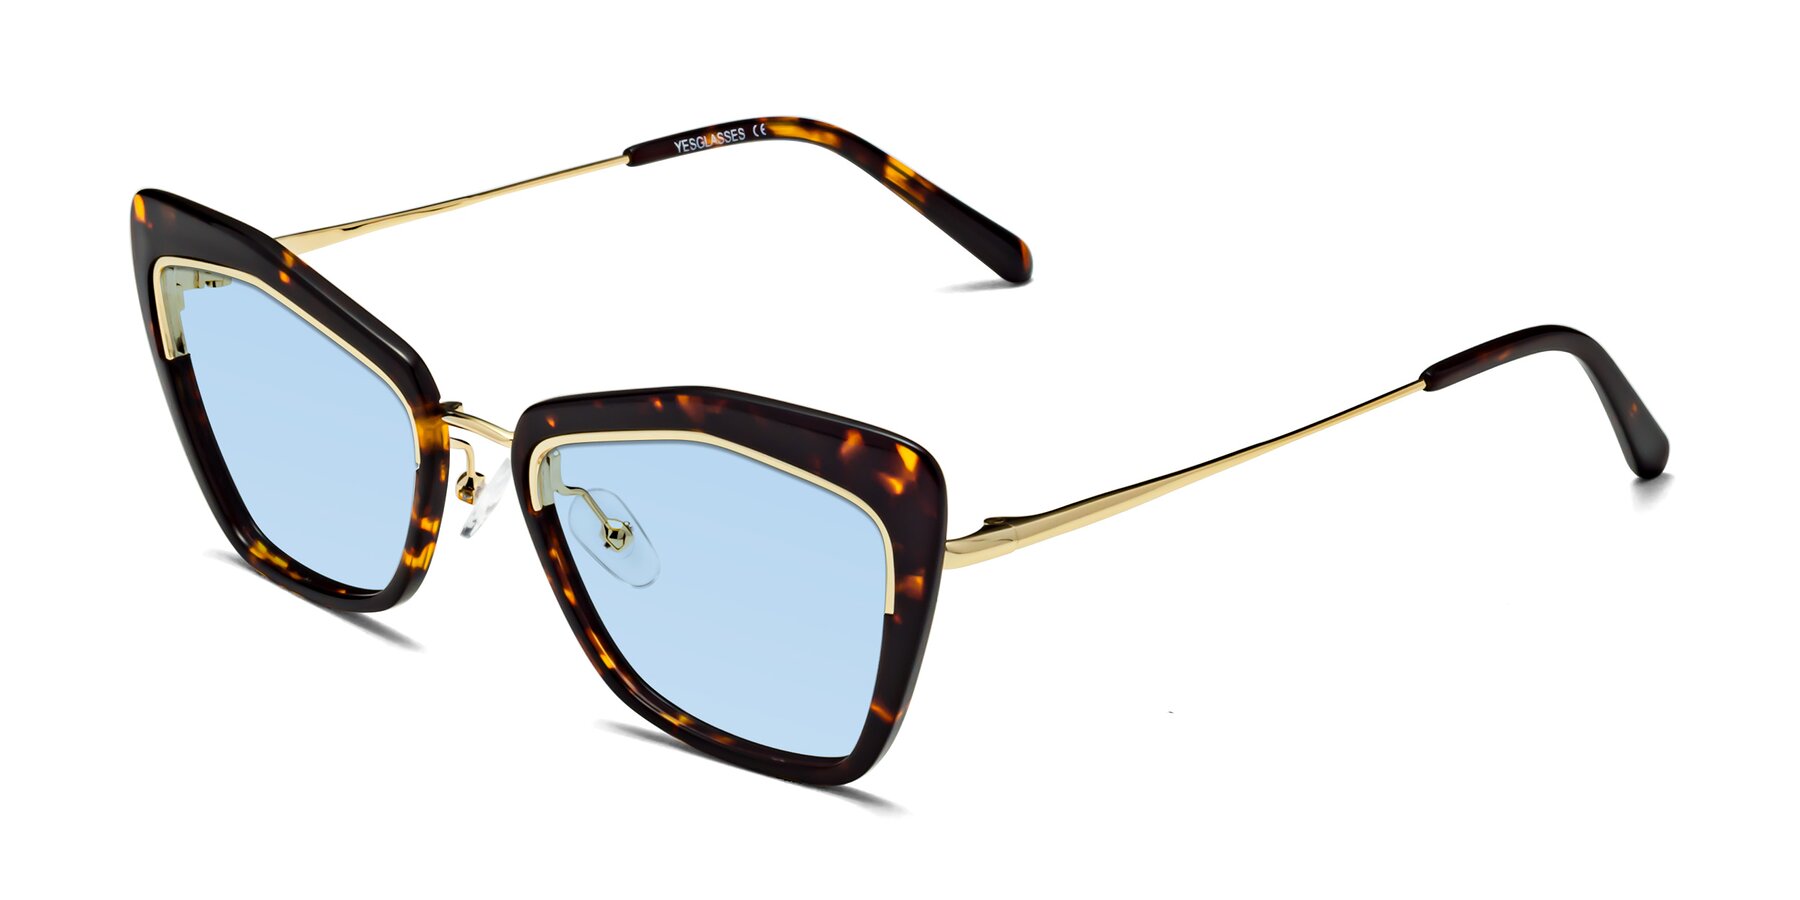 Angle of Lasso in Deep Tortoise with Light Blue Tinted Lenses